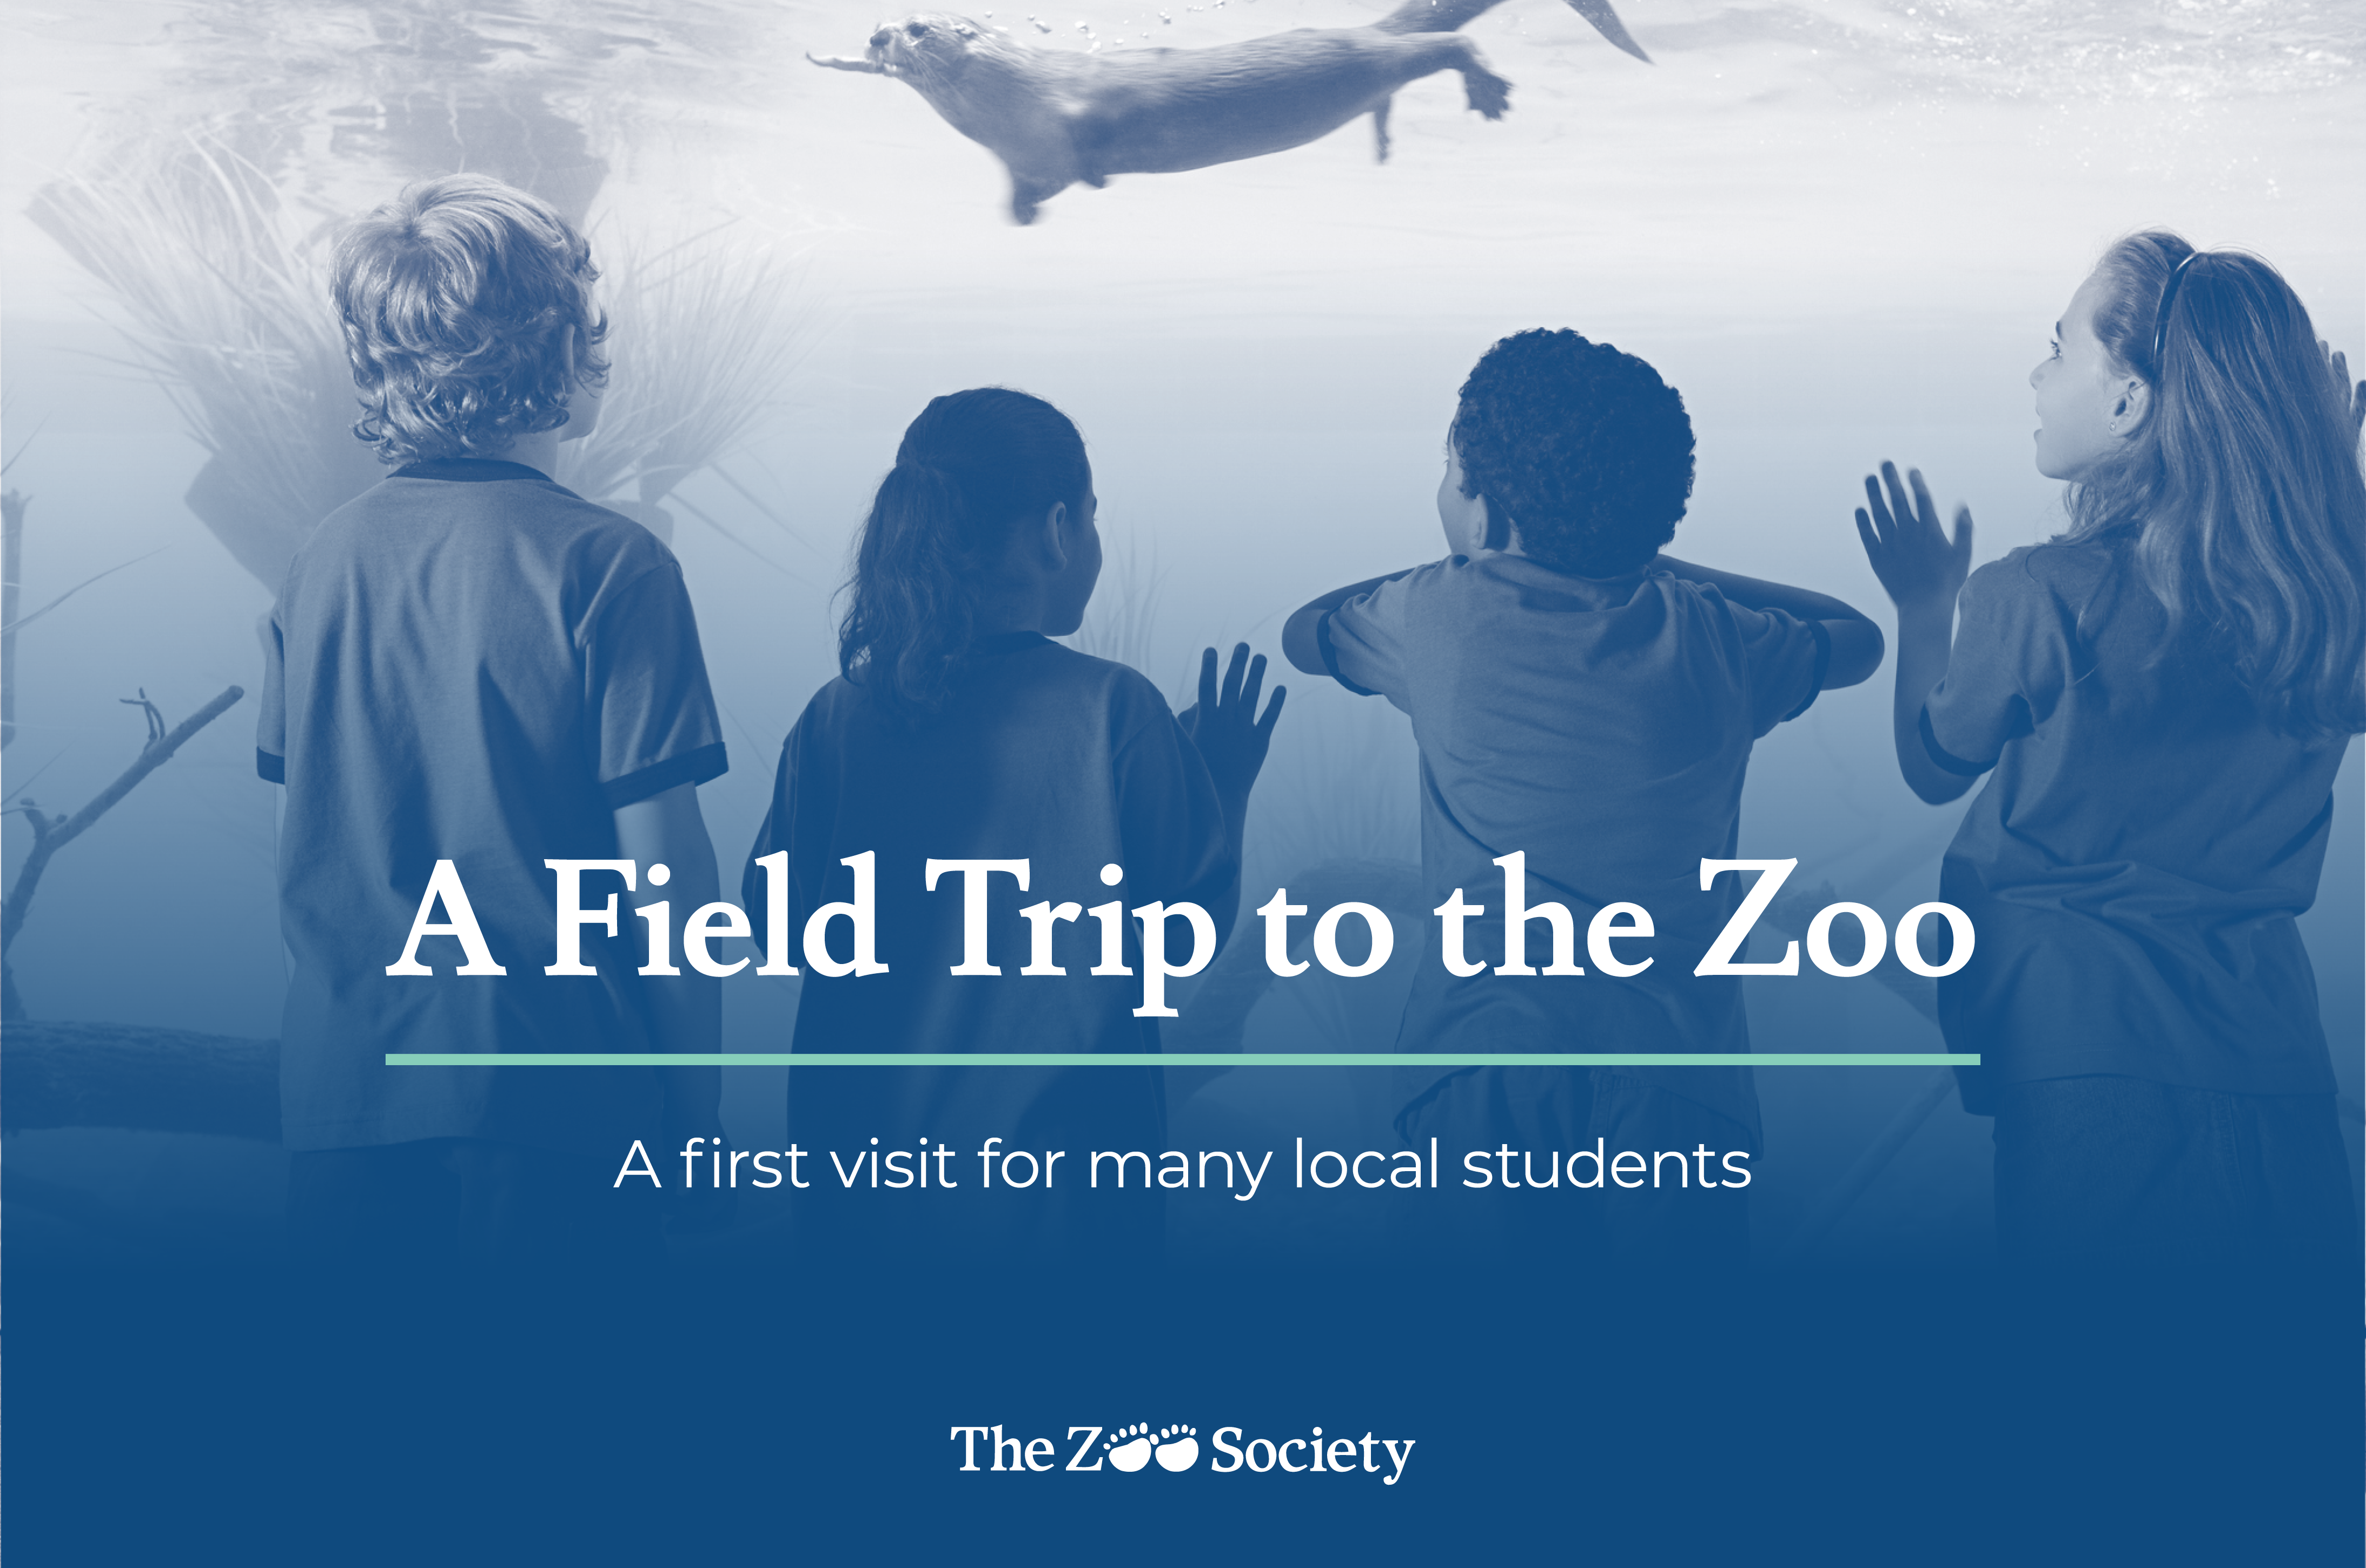 A Field Trip to the Zoo